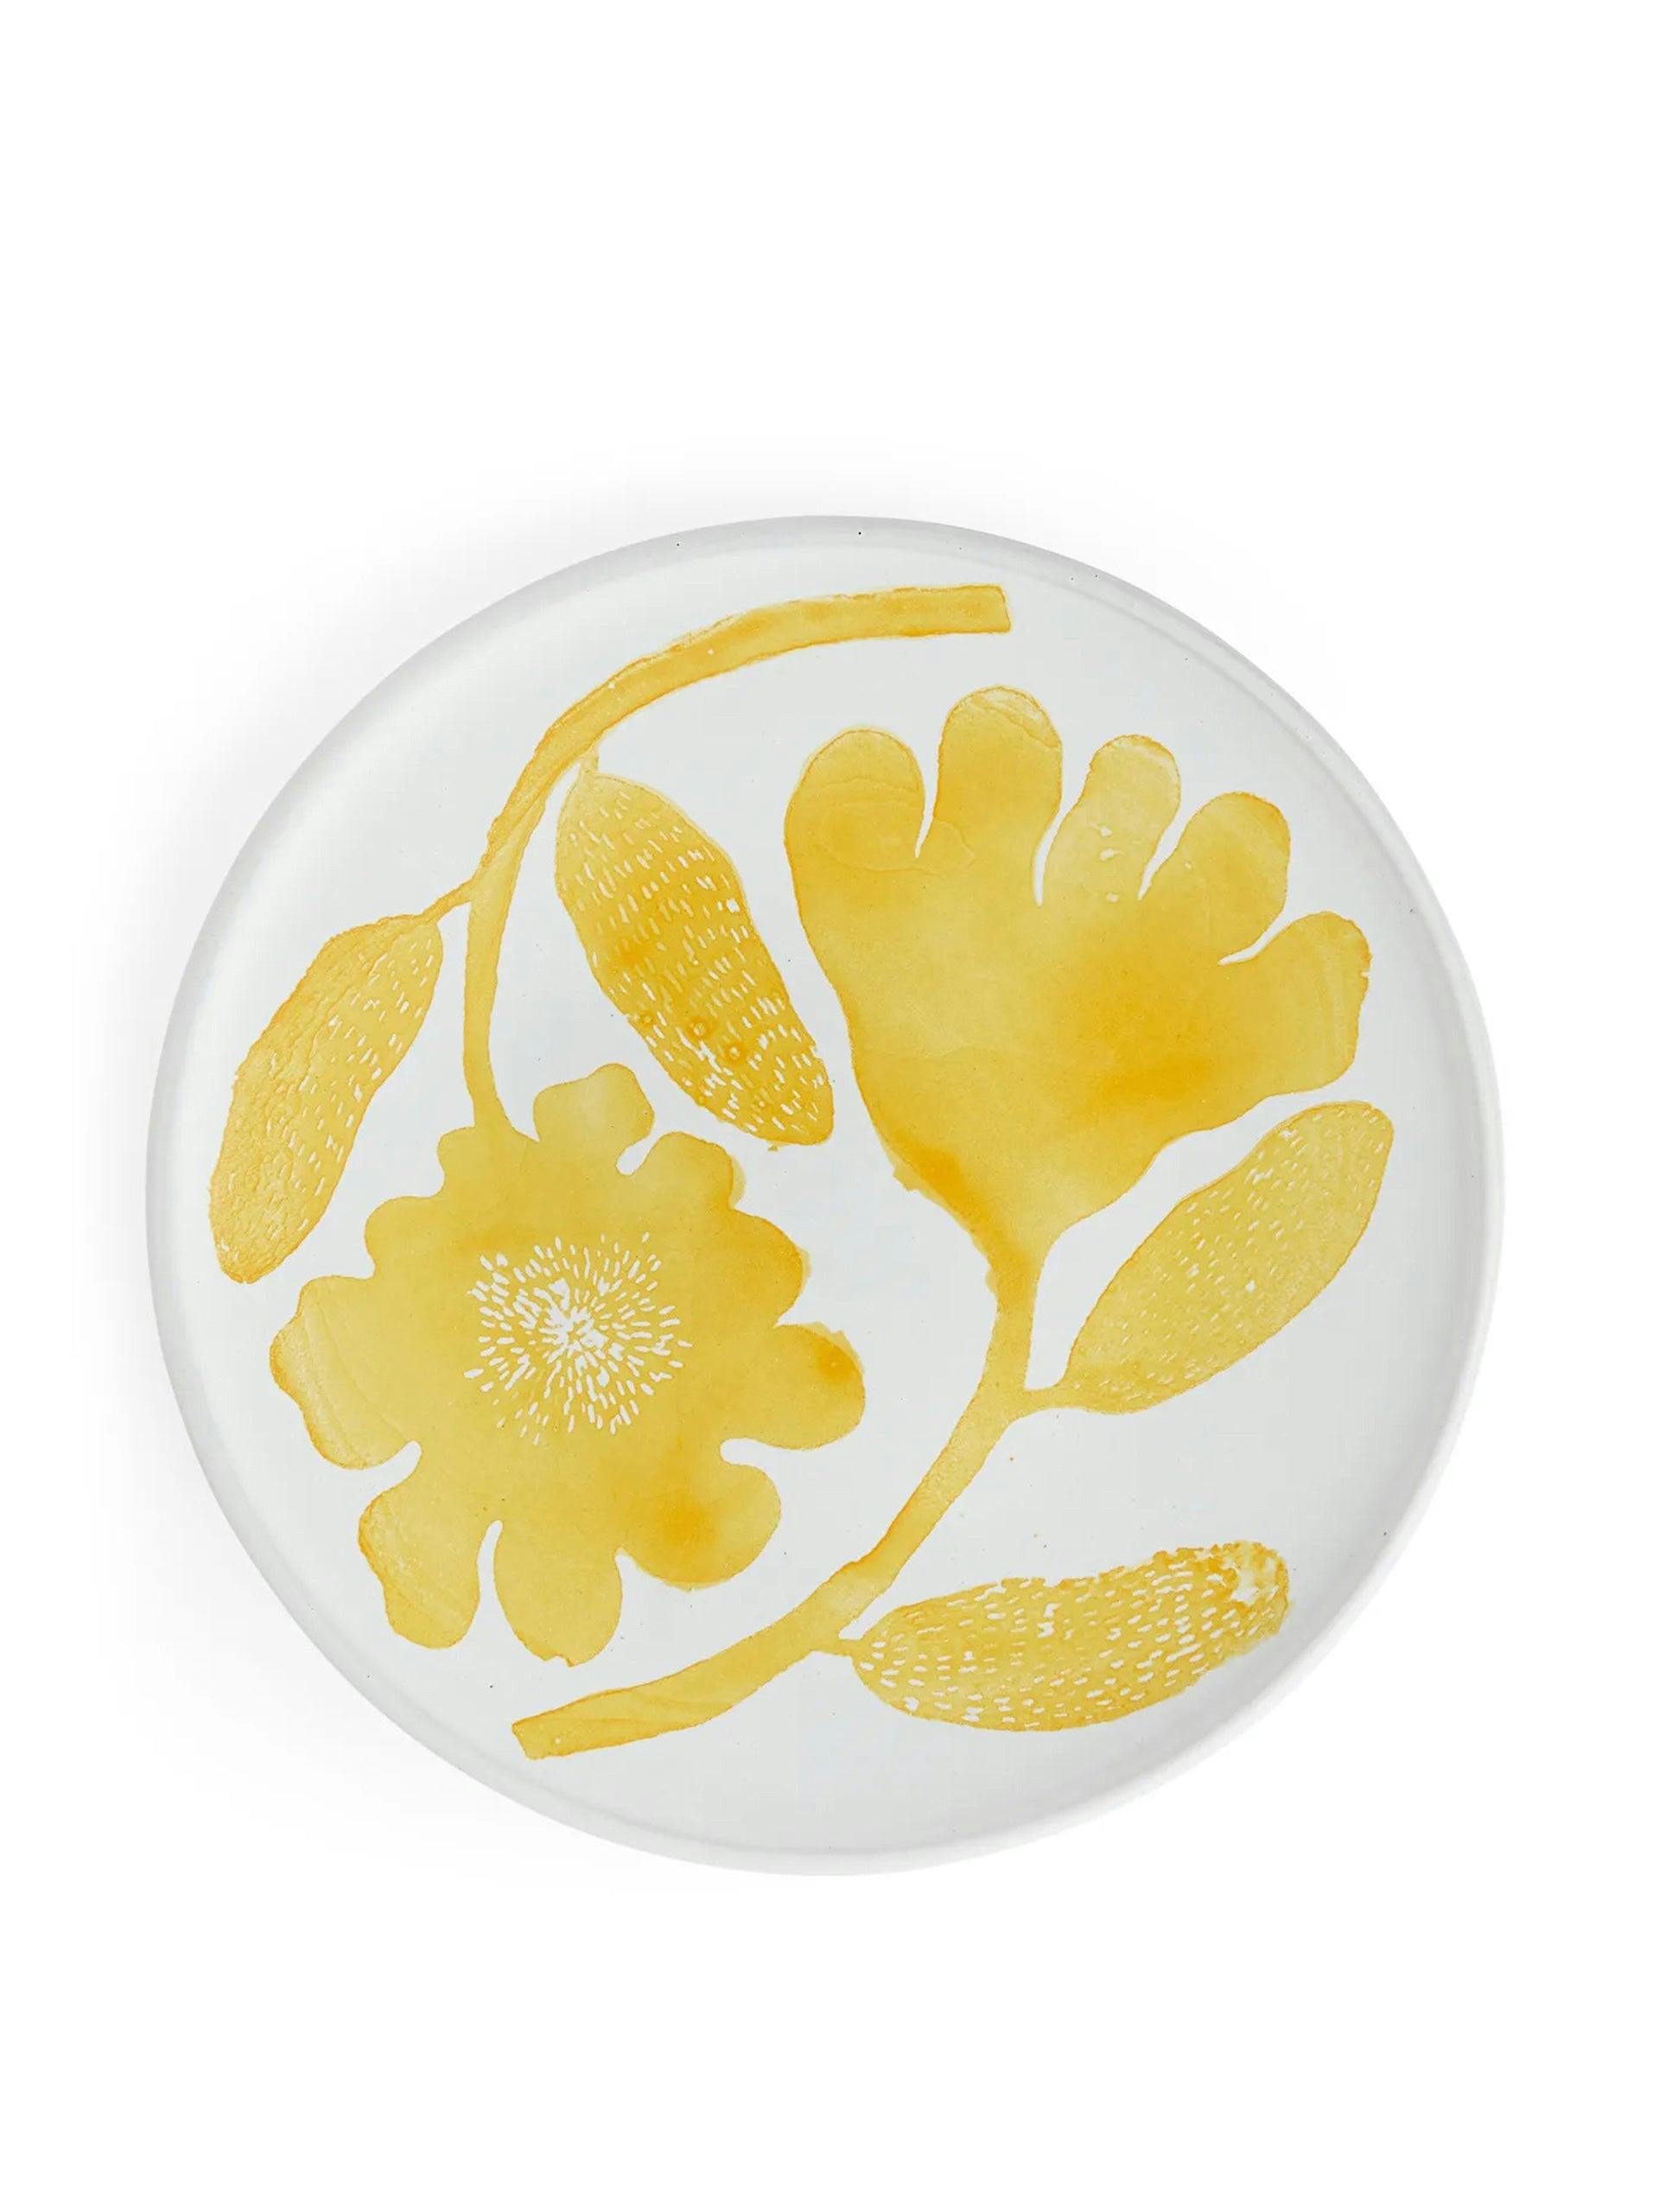 Hand painted floral plate